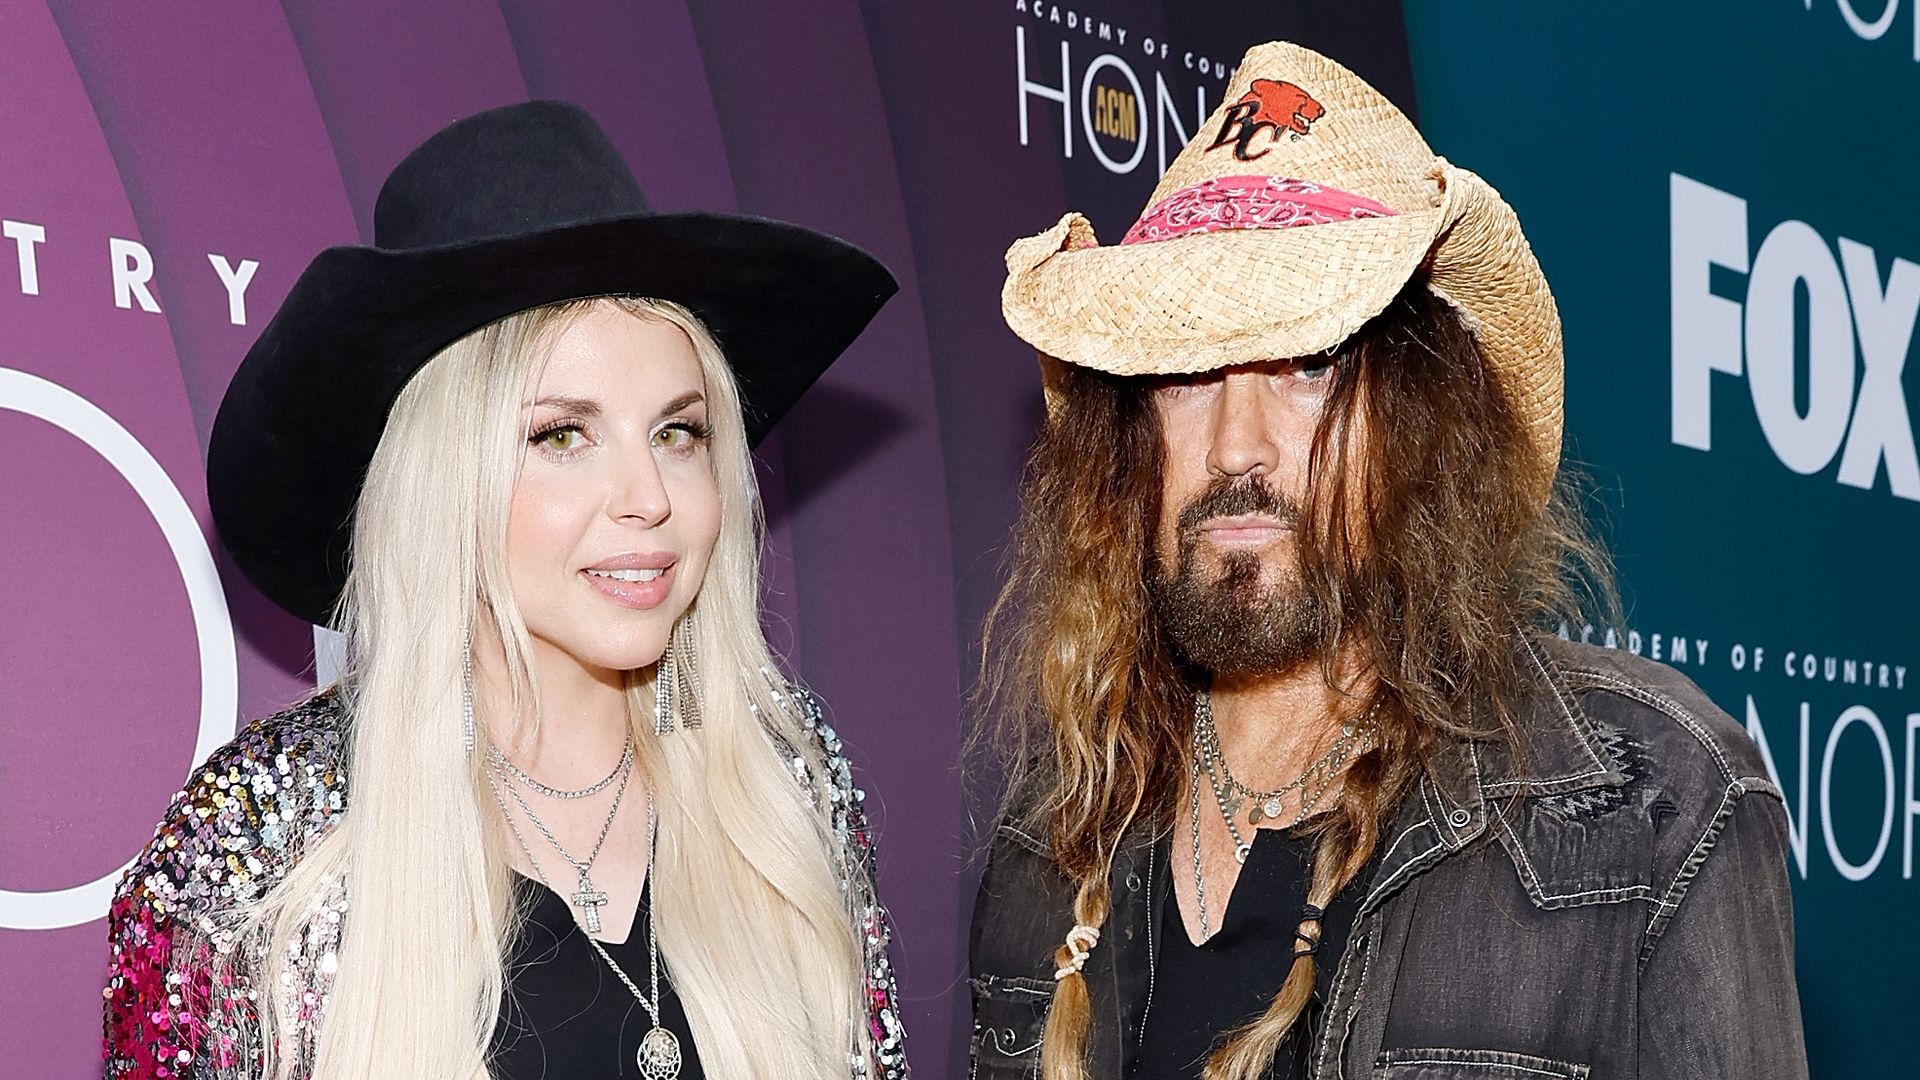 FIREROSE and Billy Ray Cyrus attend the 16th Annual Academy of Country Music Honors at Ryman Auditorium on August 23, 2023 